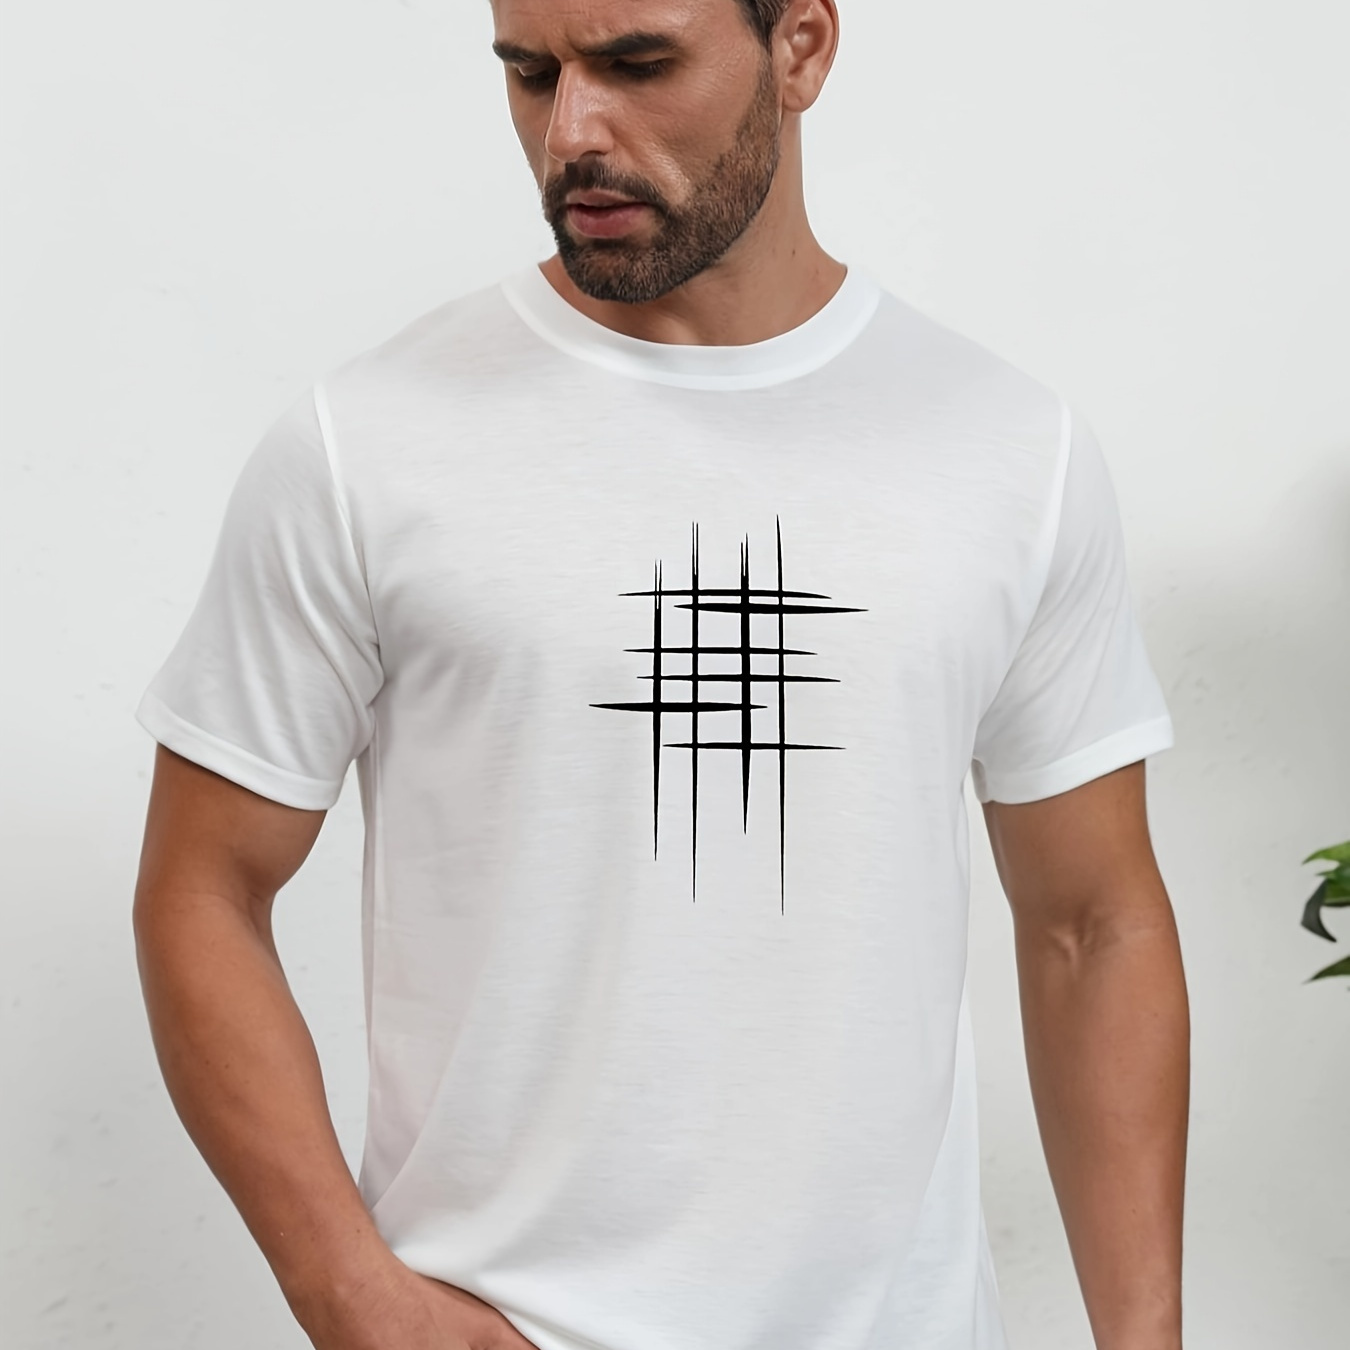 

Line Cross Men's T-shirt For Summer Outdoor, Casual Slightly Stretch Crew Neck Tee Short Sleeve Graphic Stylish Clothing